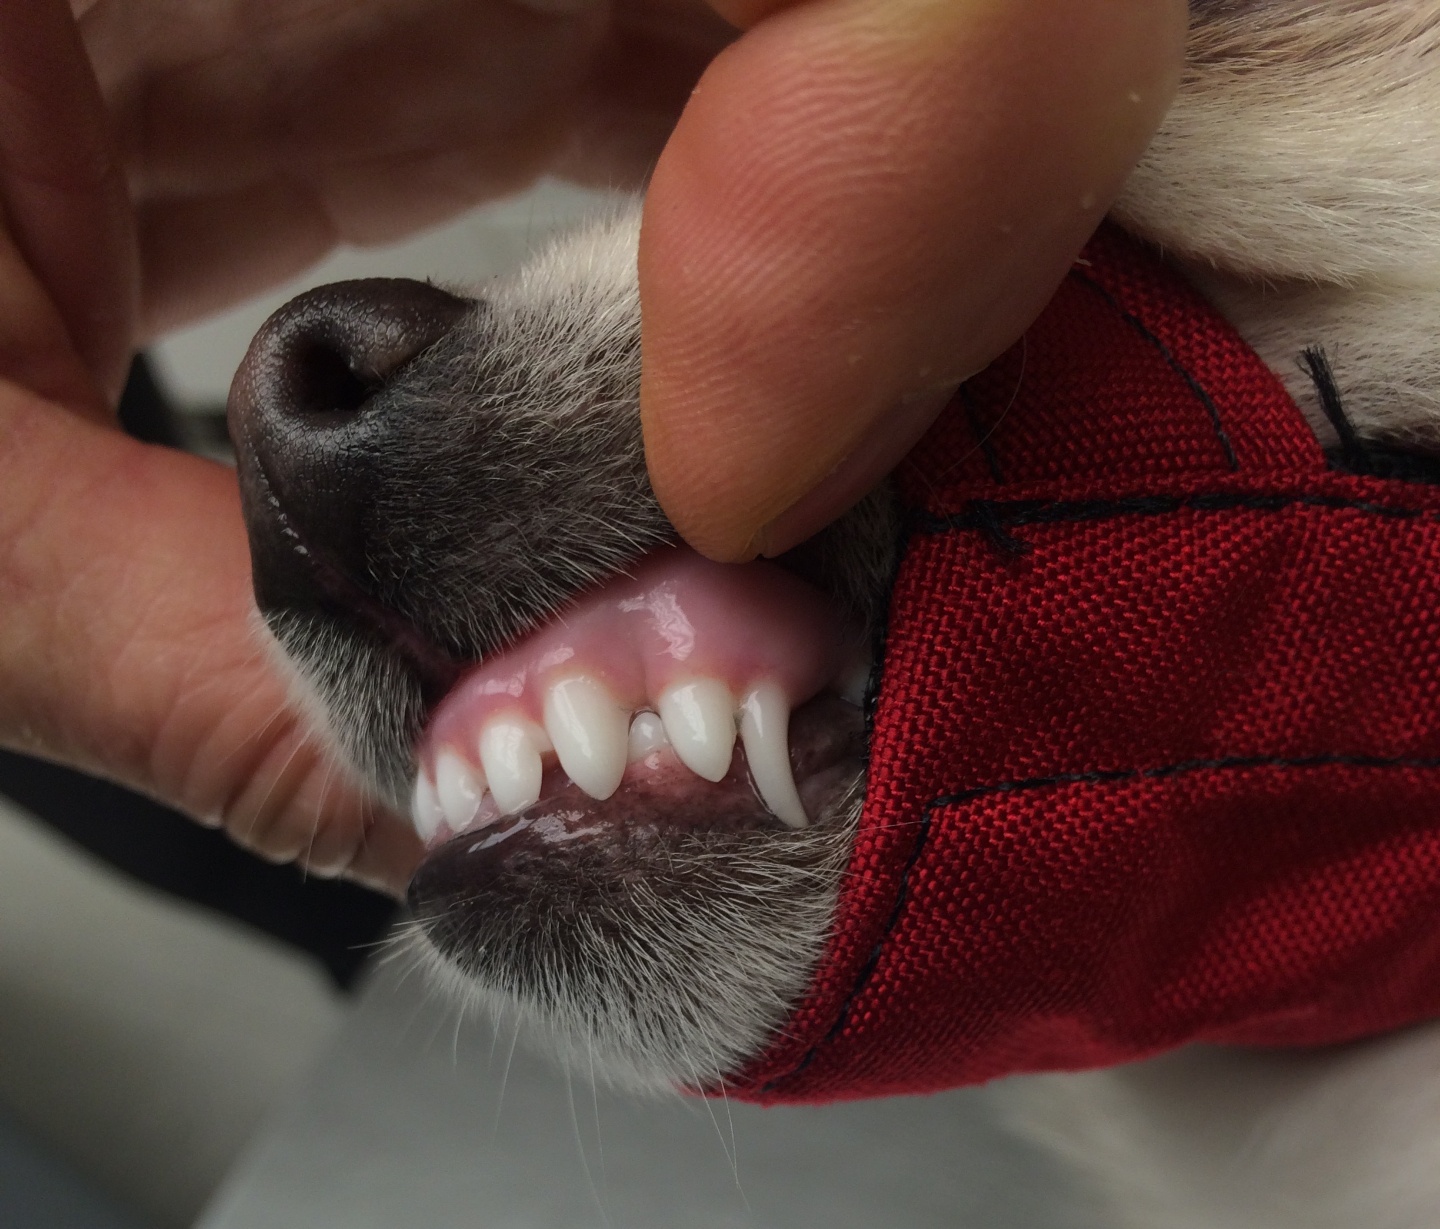 An American Eskimo with retained baby canines leading to base narrow adult teeth